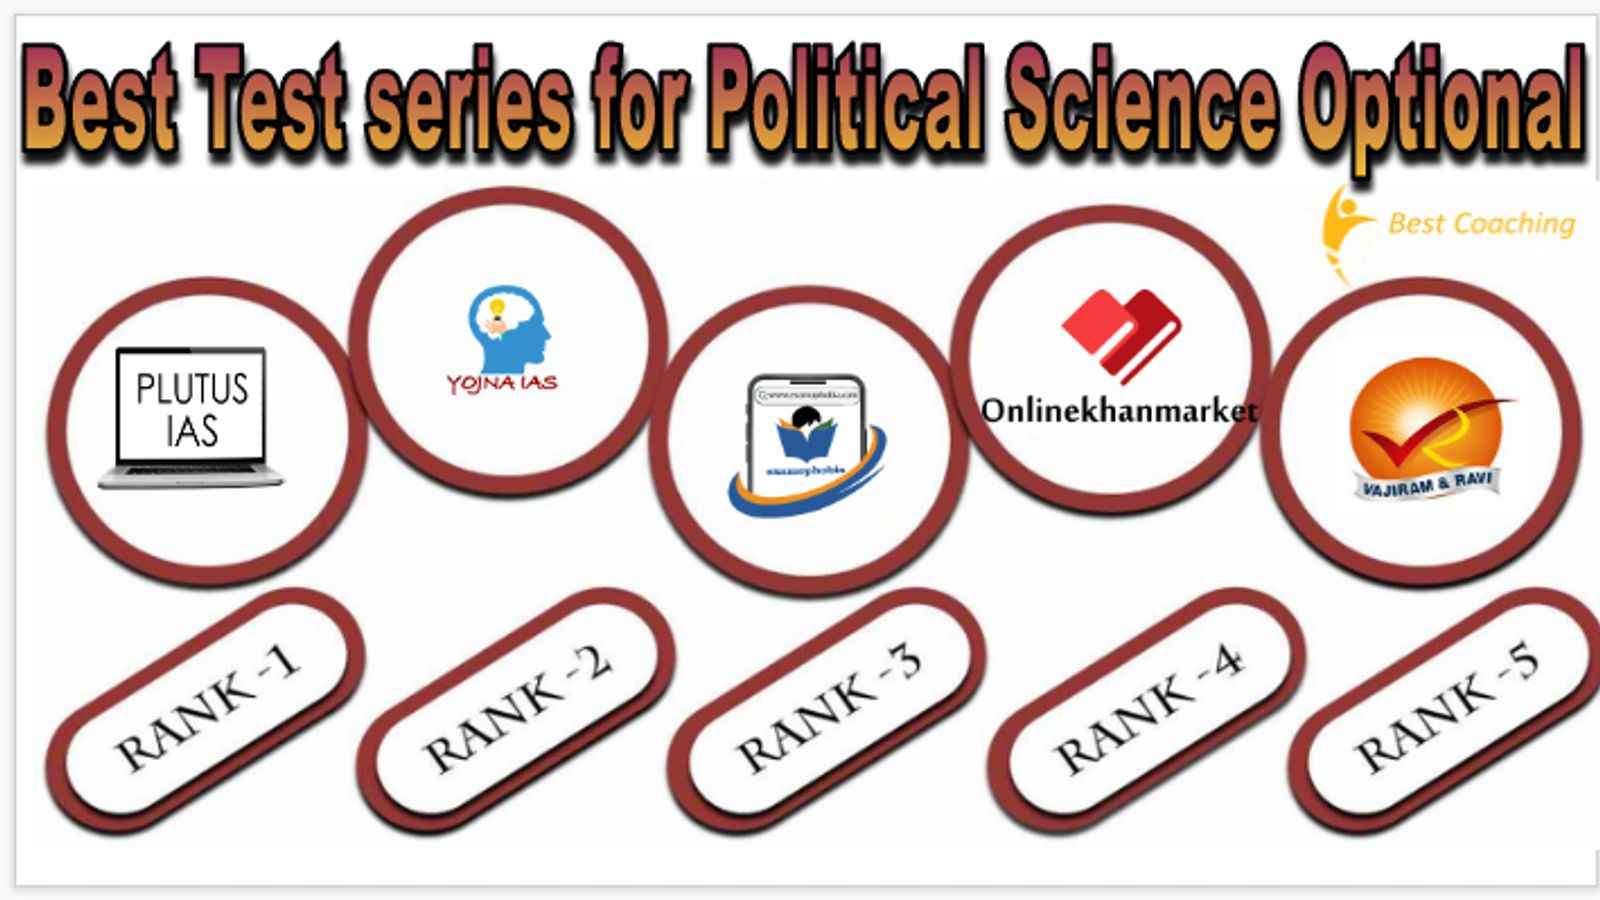 Best Test series for Political Science Optional